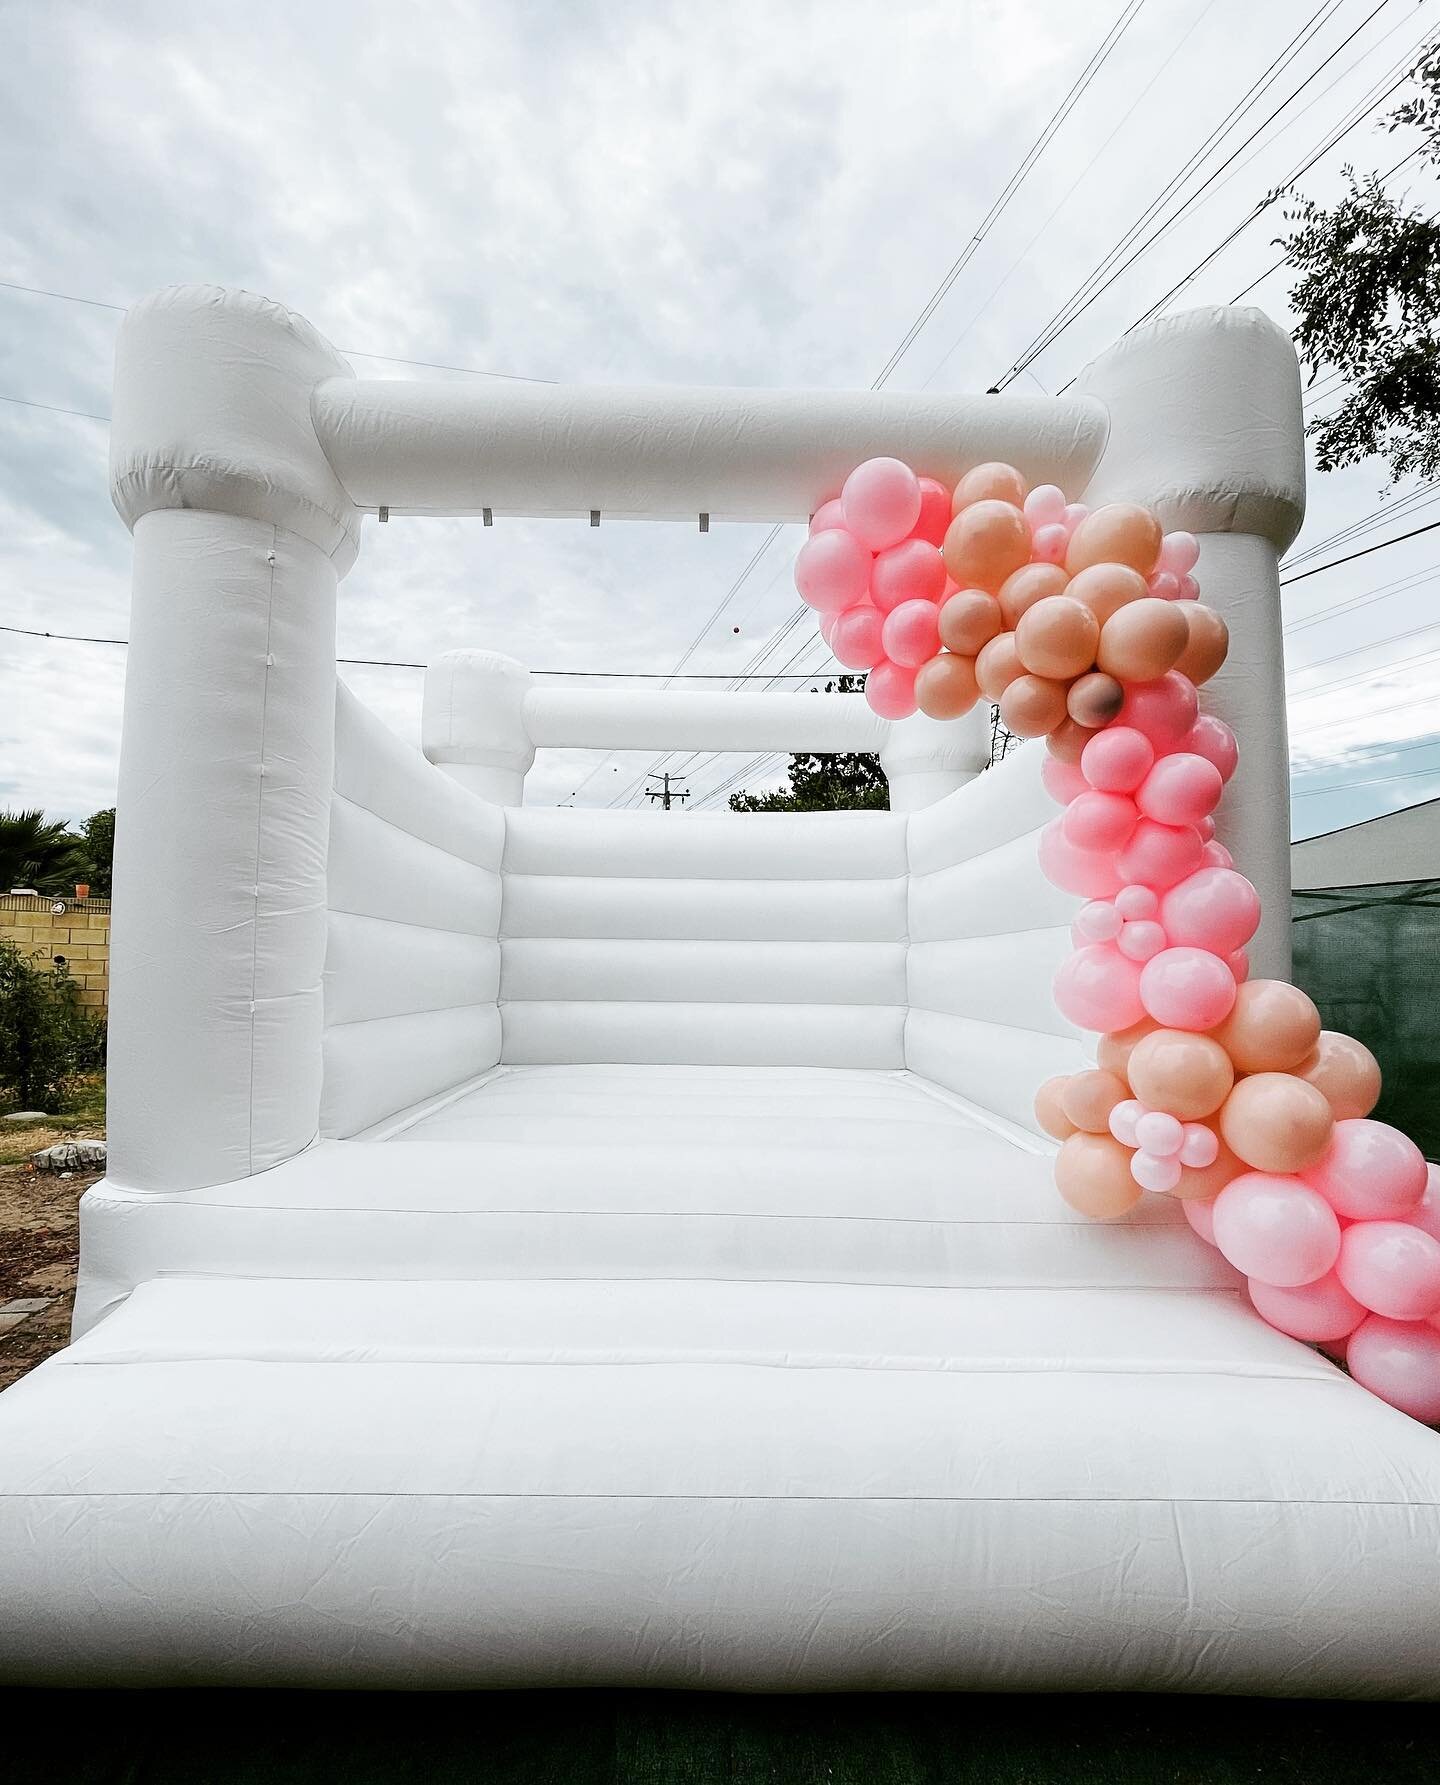 We got to dressed our White Bouncer for Beautiful Mama having a baby girl soon!💓🤍

#whitebouncer #whitebouncehouse #whitejumper #luxurylifestyle #luxuryparty #whitejumpers #partyrentalslosangeles #fun #jump #babyshowerbouncer #pink #babyshower